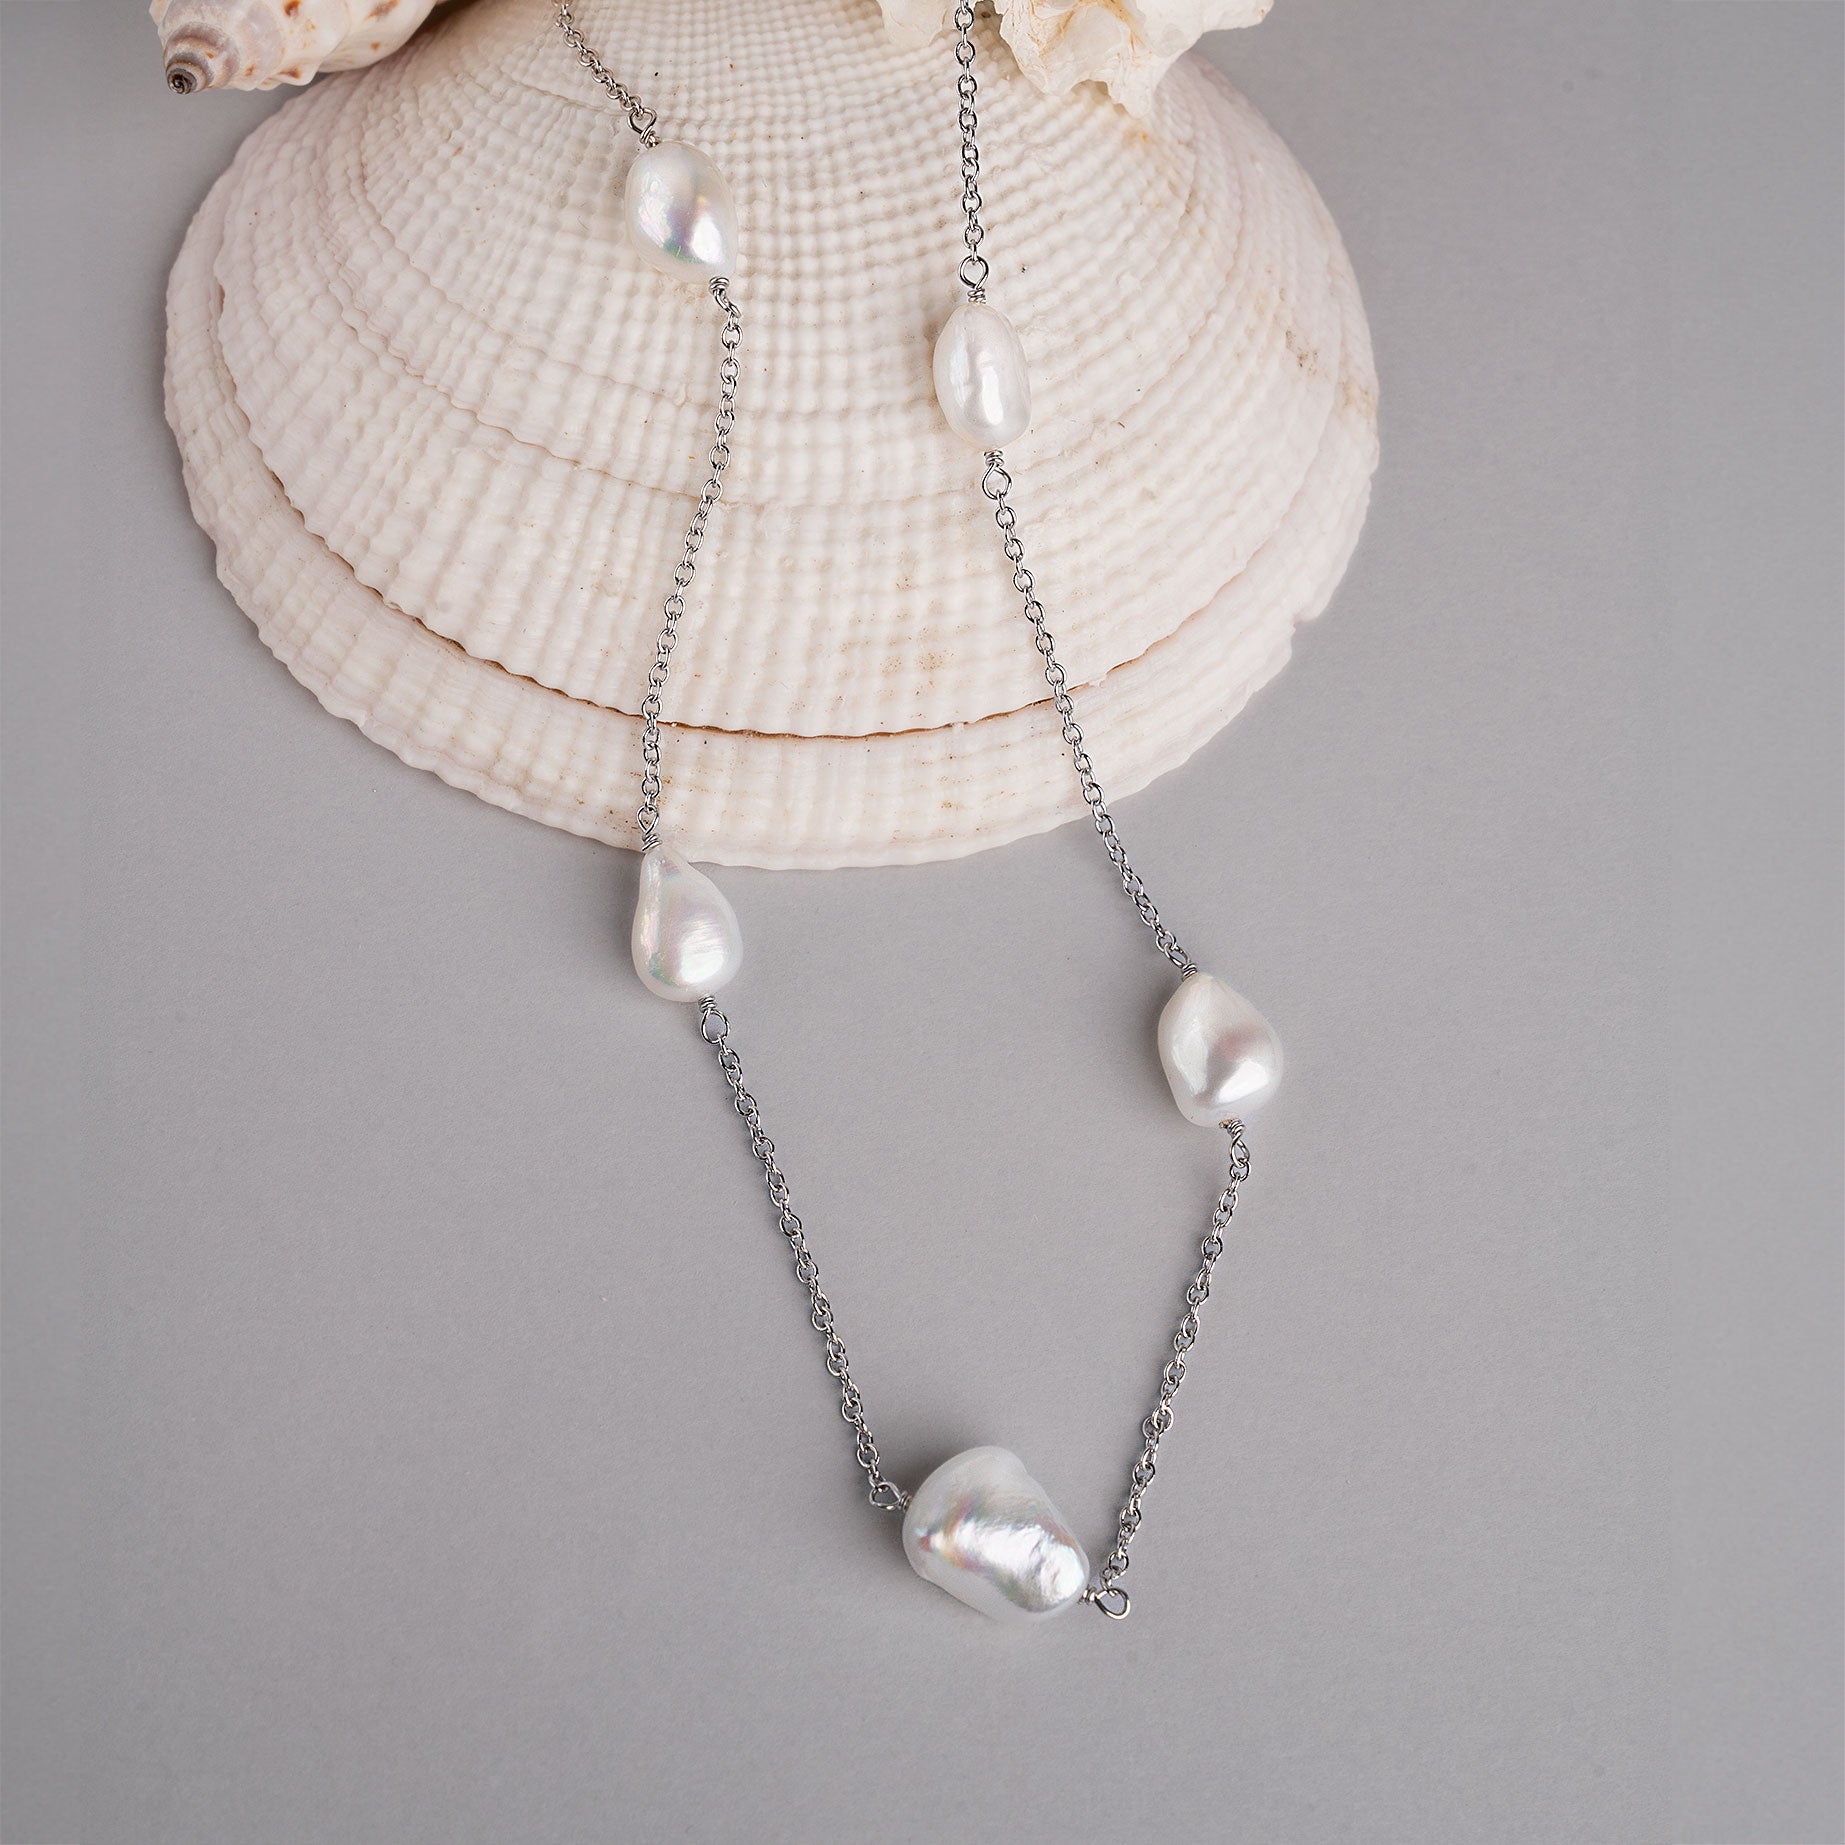 Sterling Silver Pendant with White Keshi Pearls